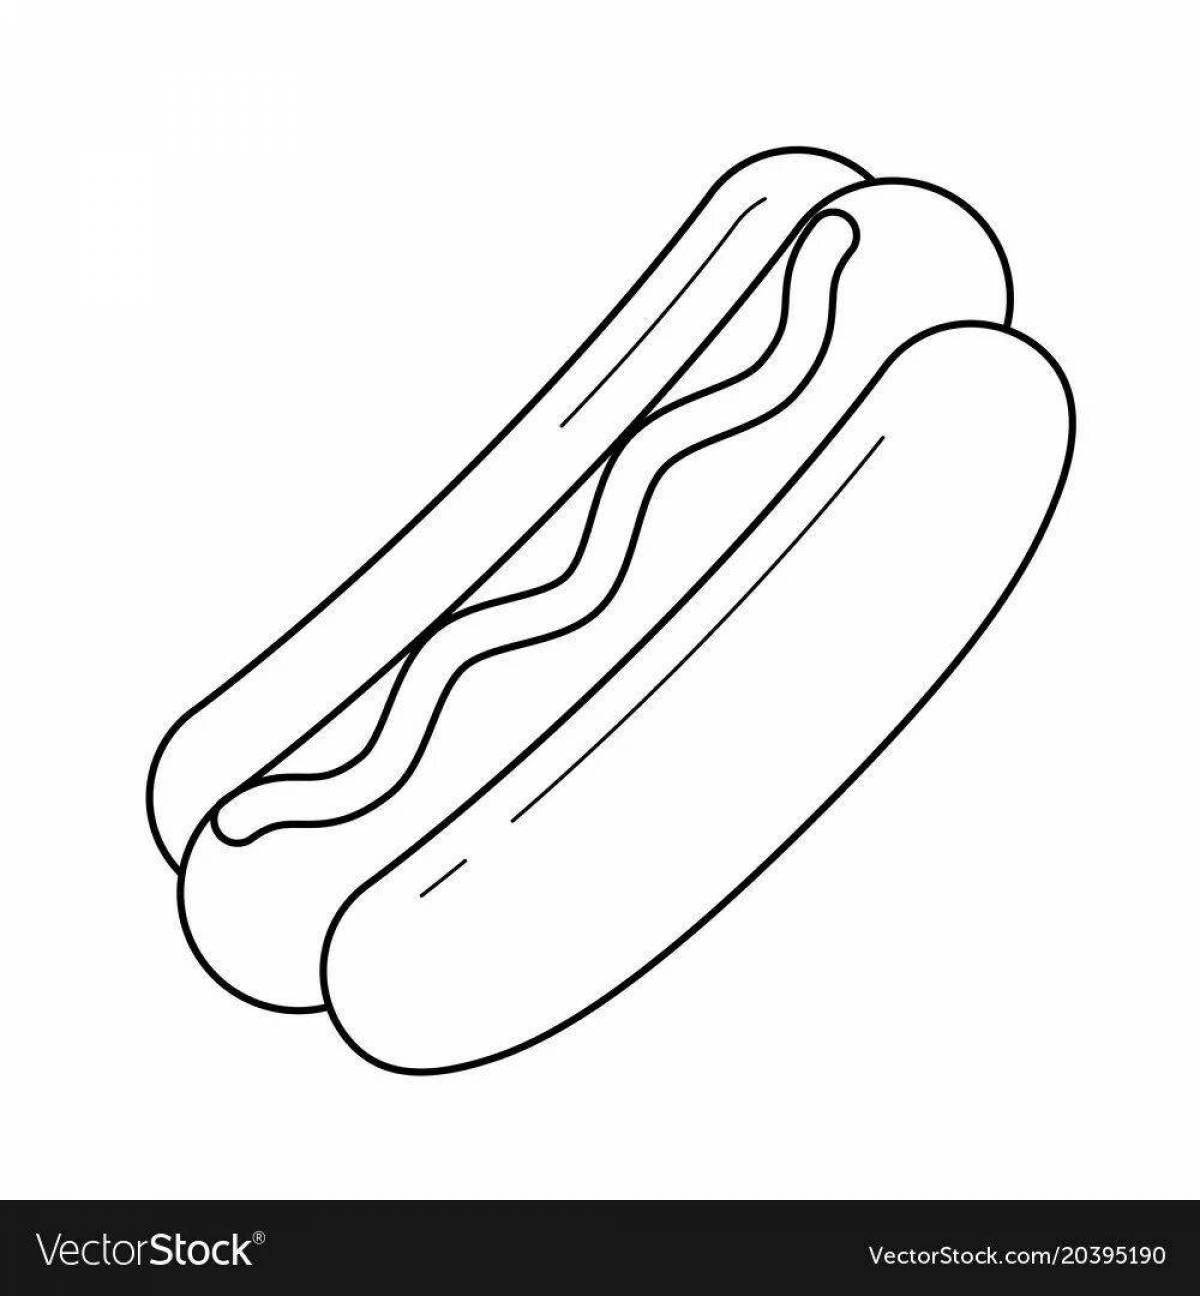 Attractive sausage coloring book for kids